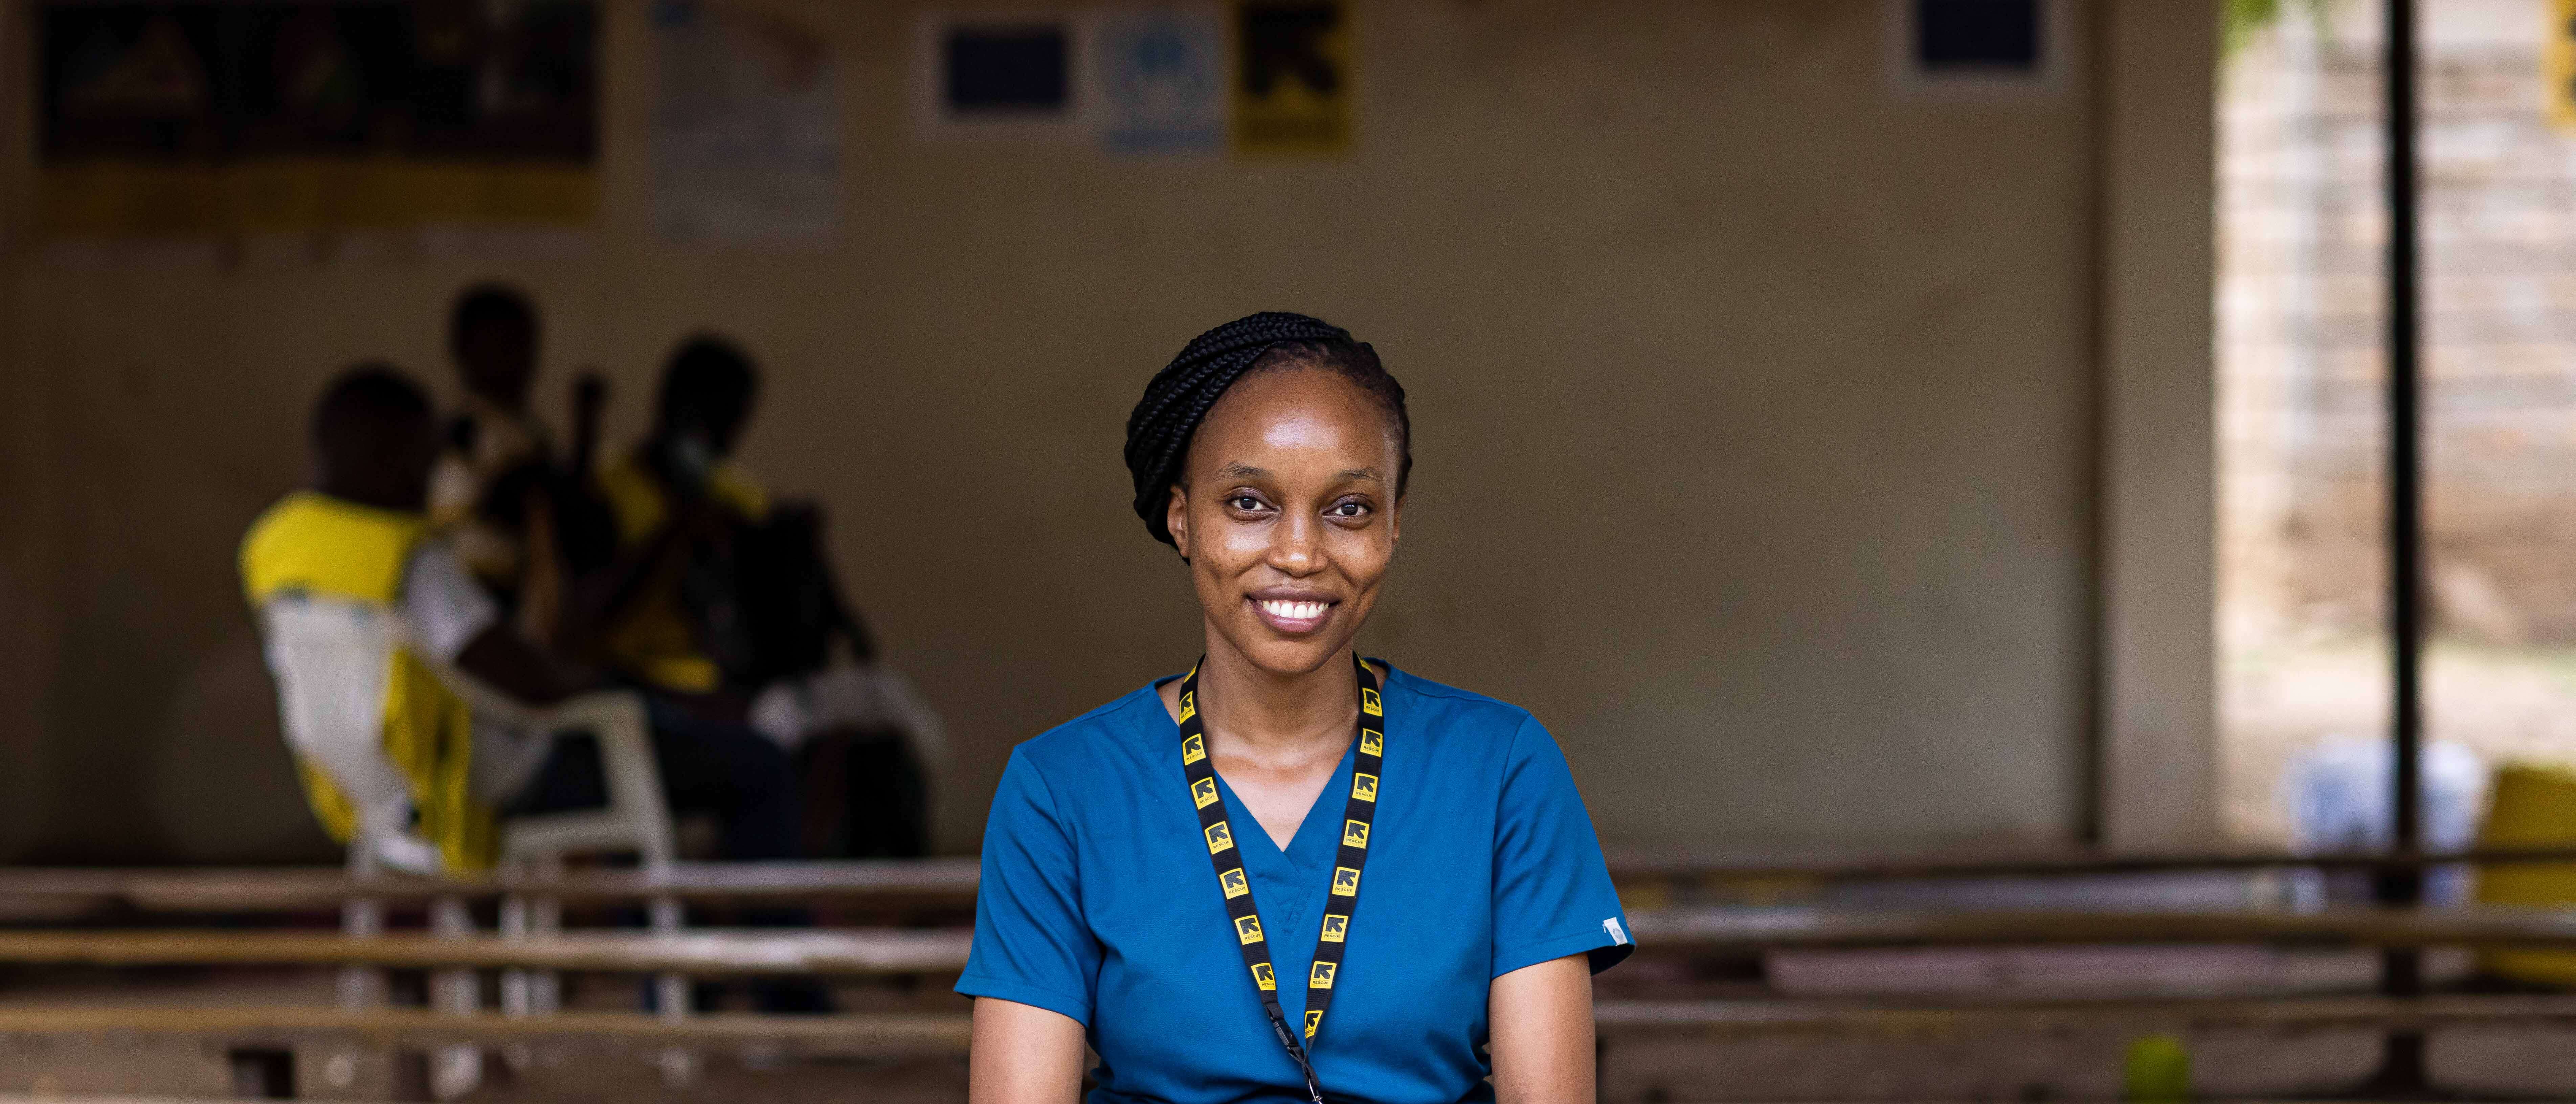 A woman wearing blue nurses scrub and an IRC lanyard, smiles and poses for a photo.